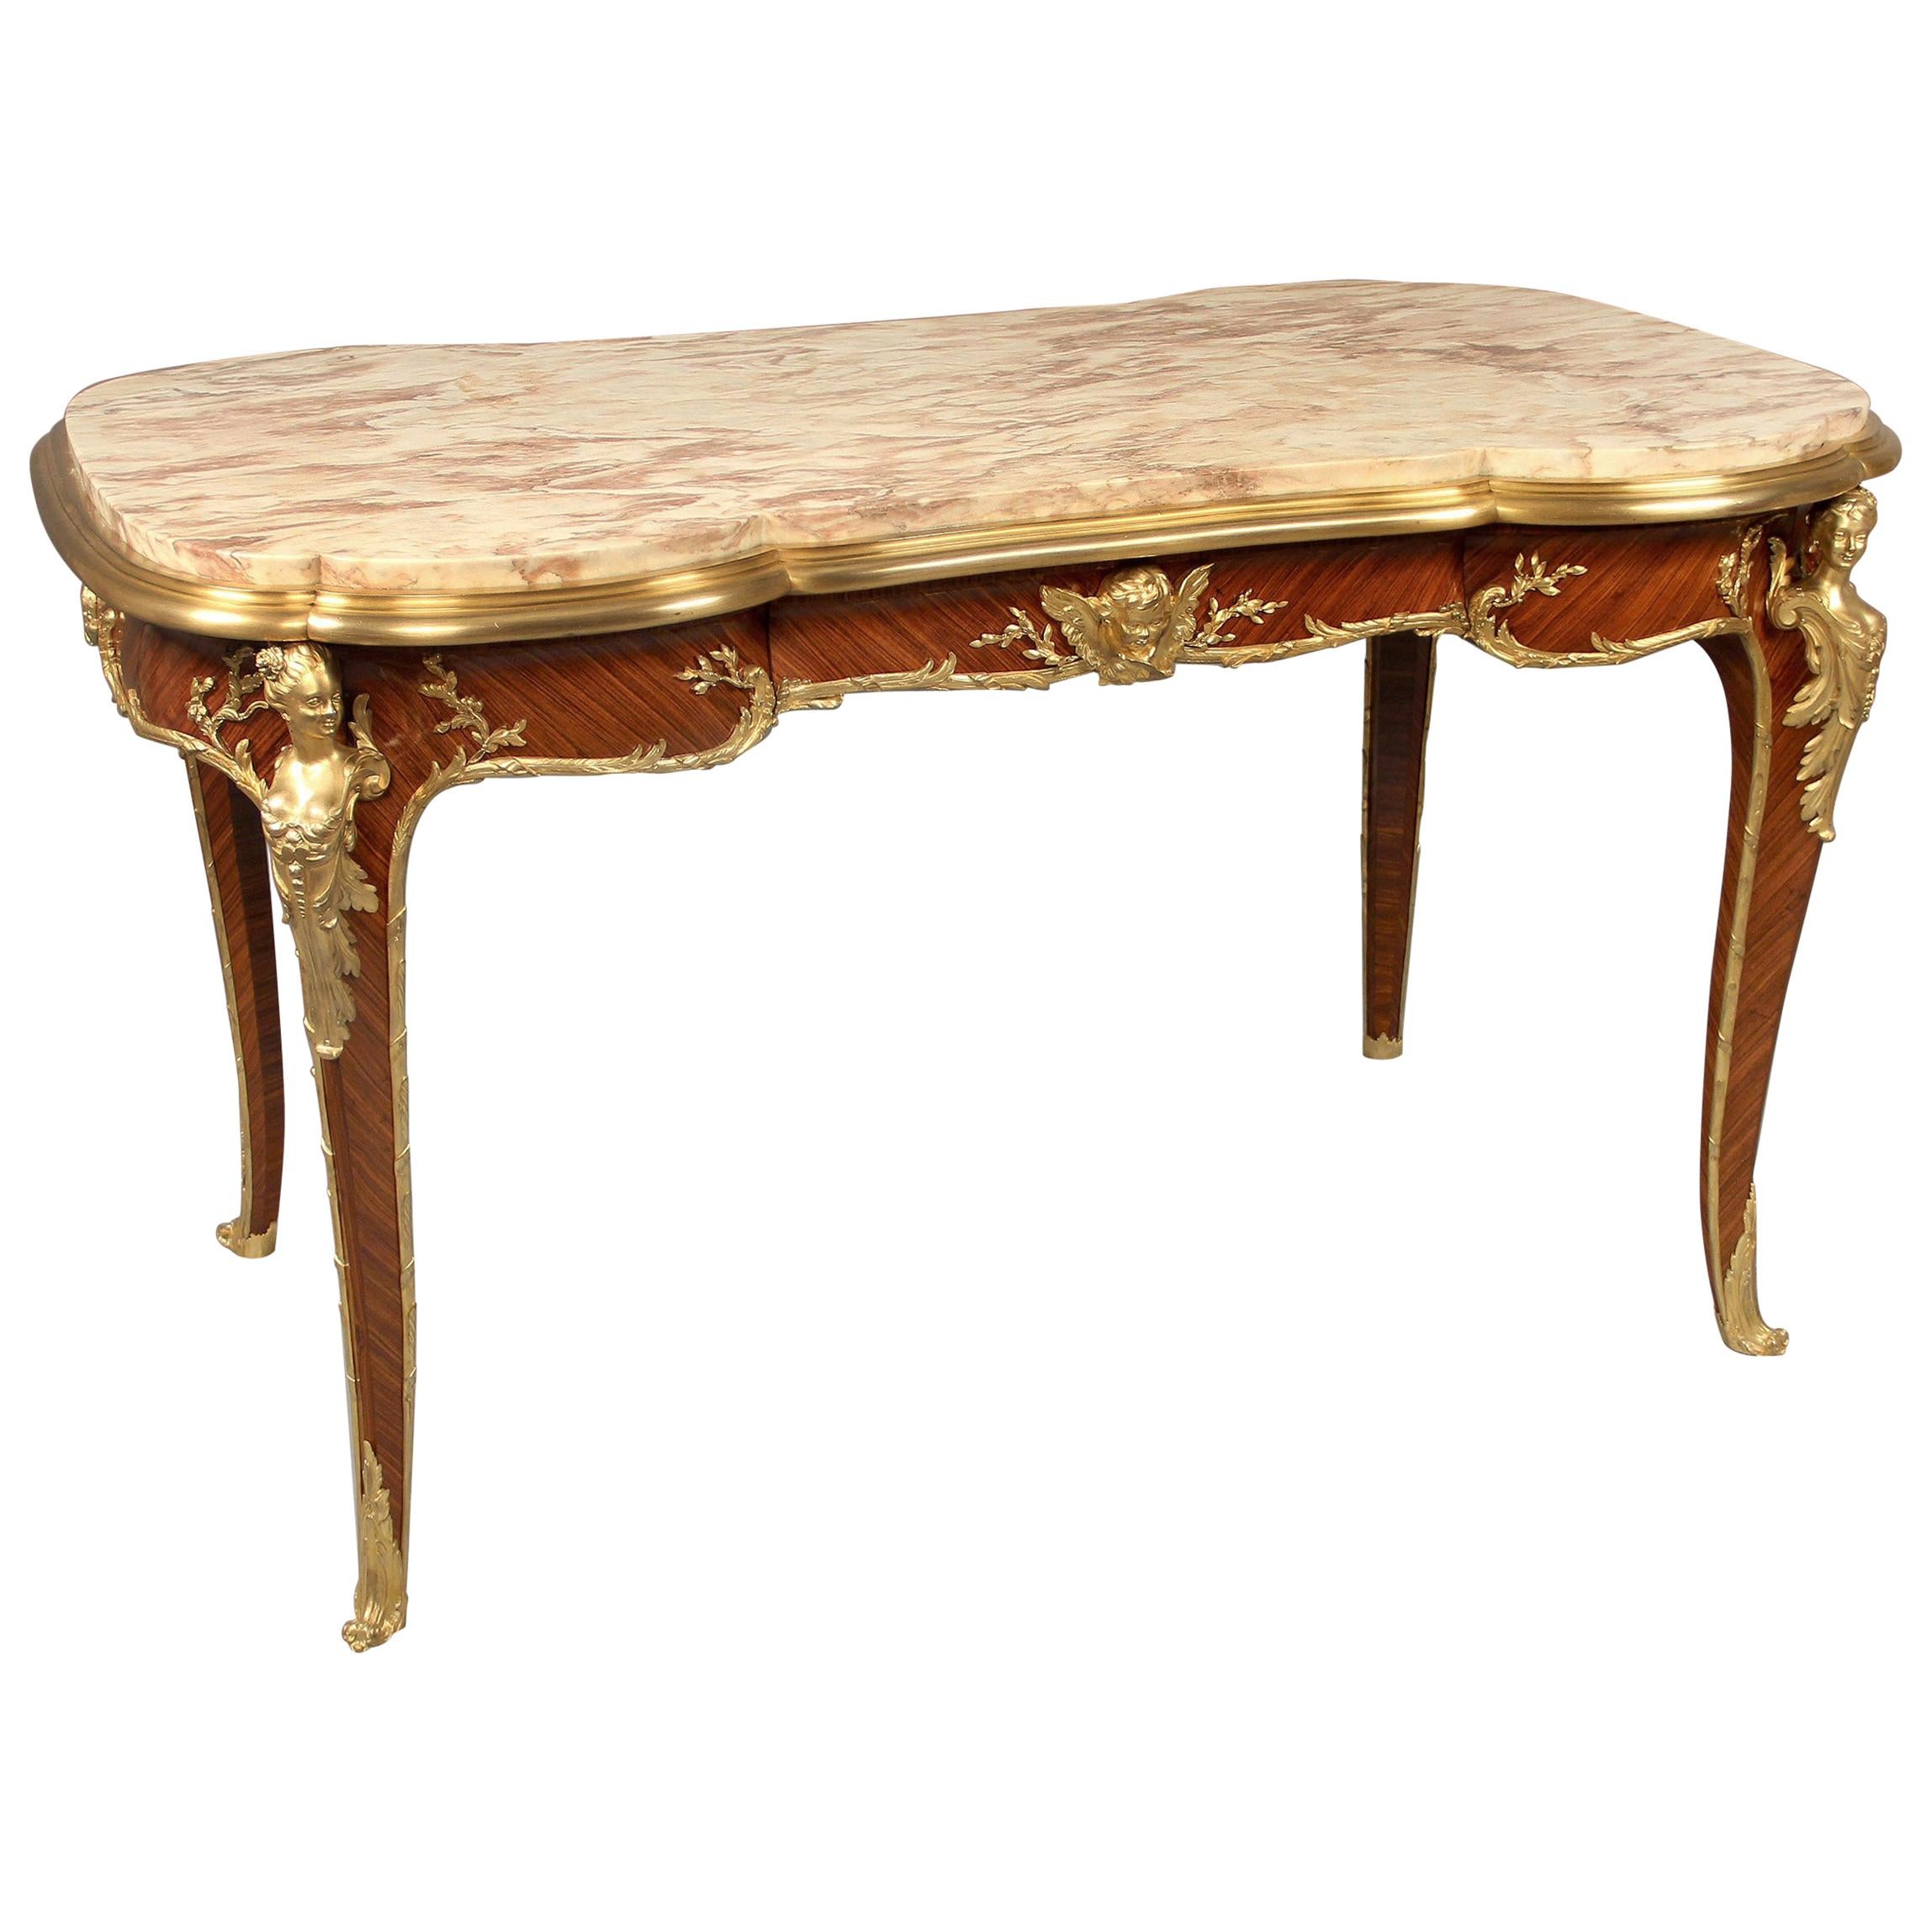 Superb Late 19th Century Gilt Bronze Mounted Center Table by Francois Linke